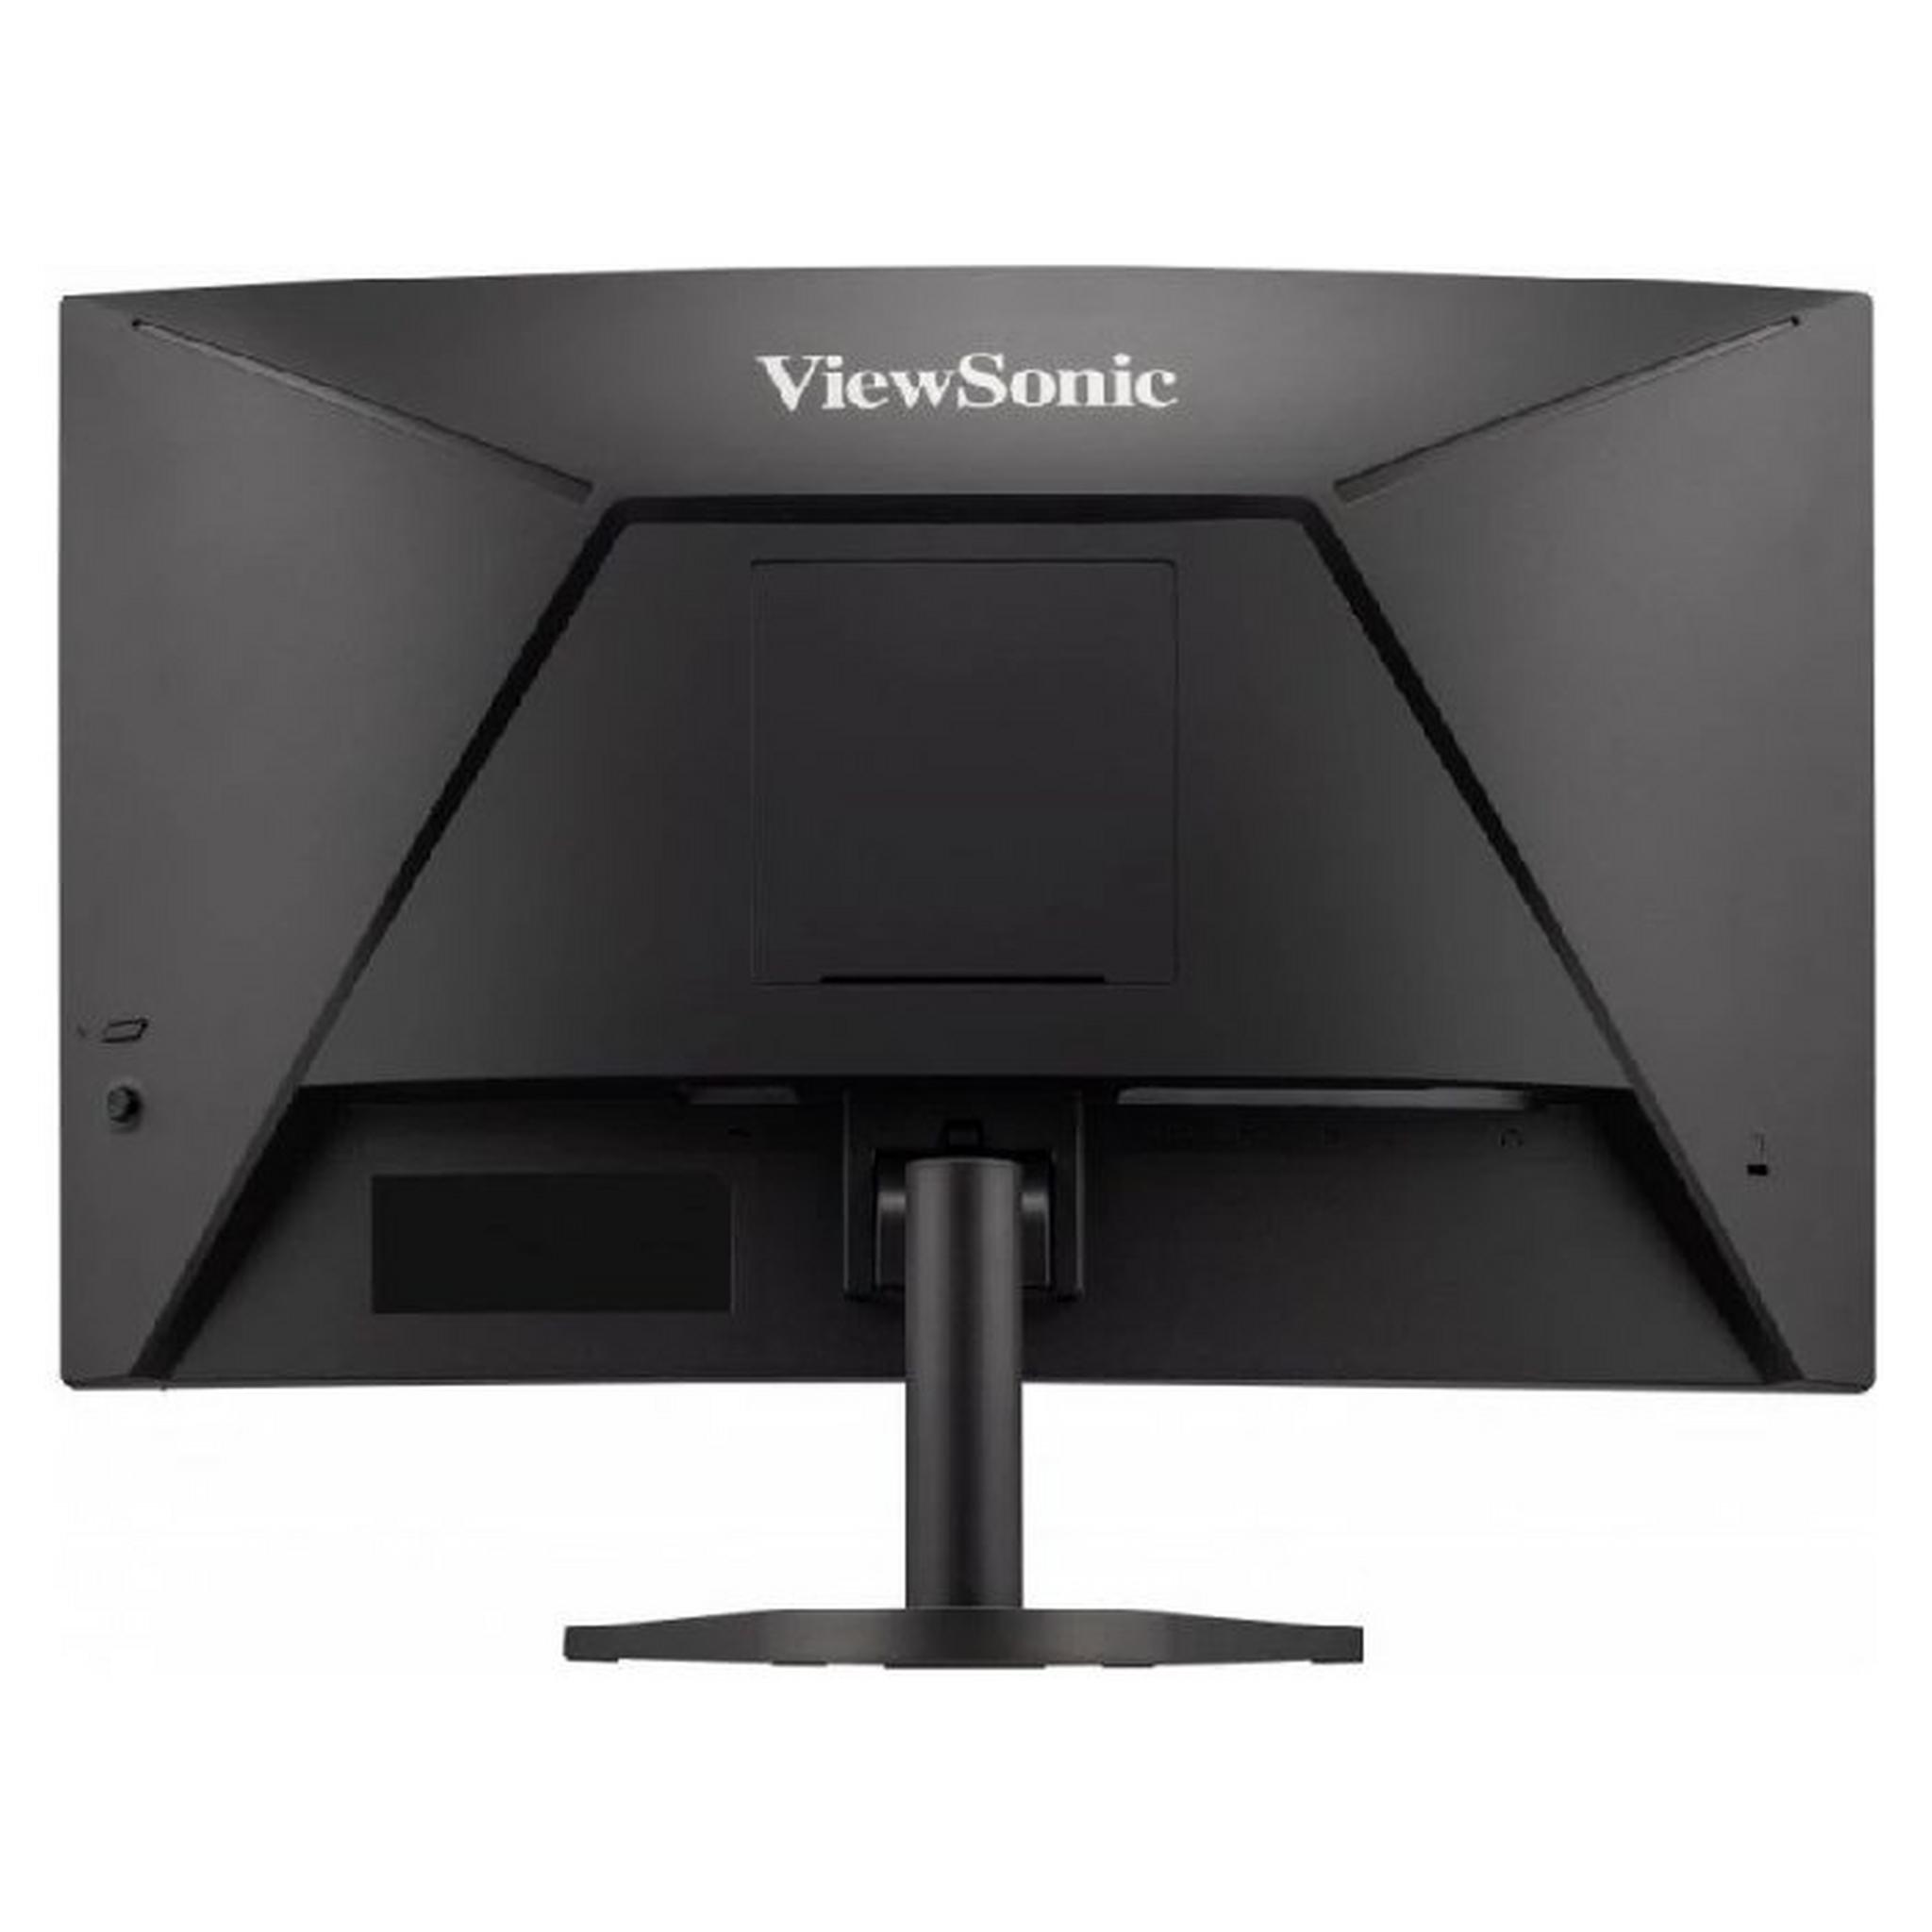 ViewSonic 24-inch |165Hz | Curved Gaming Monitor